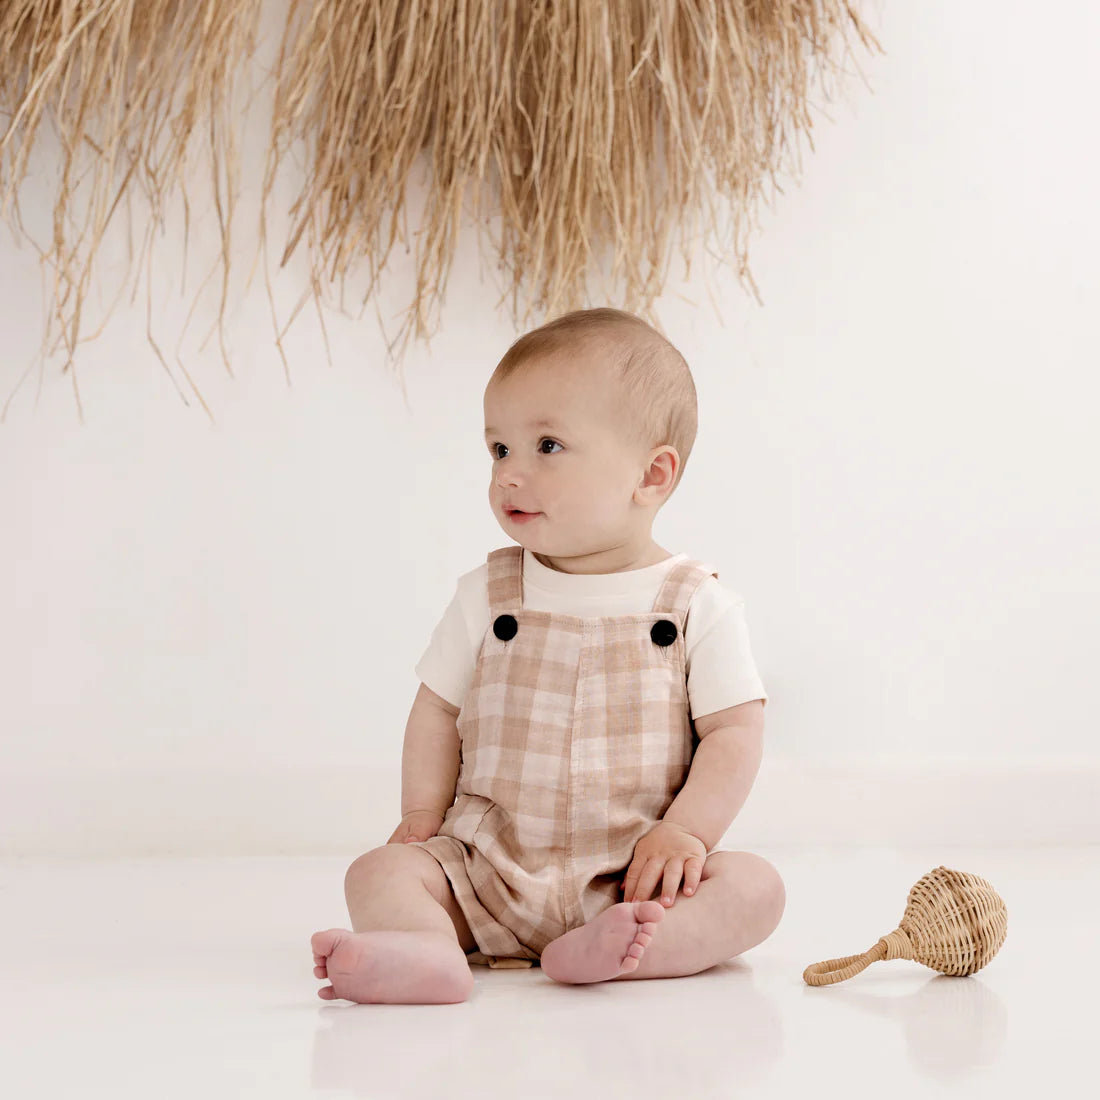 Taupe Gingham Muslin Overalls